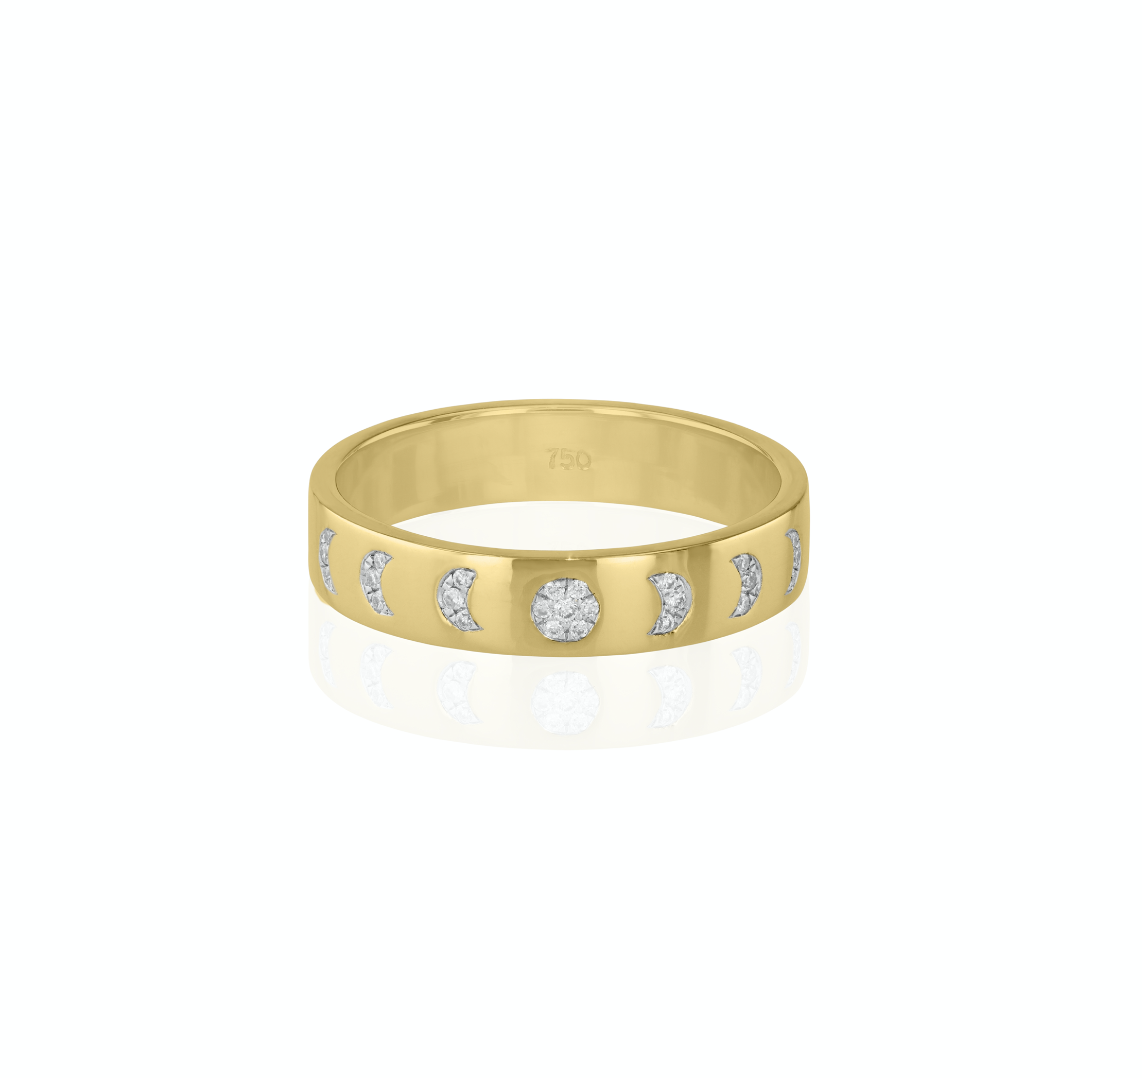 Moon Phase ring with diamonds